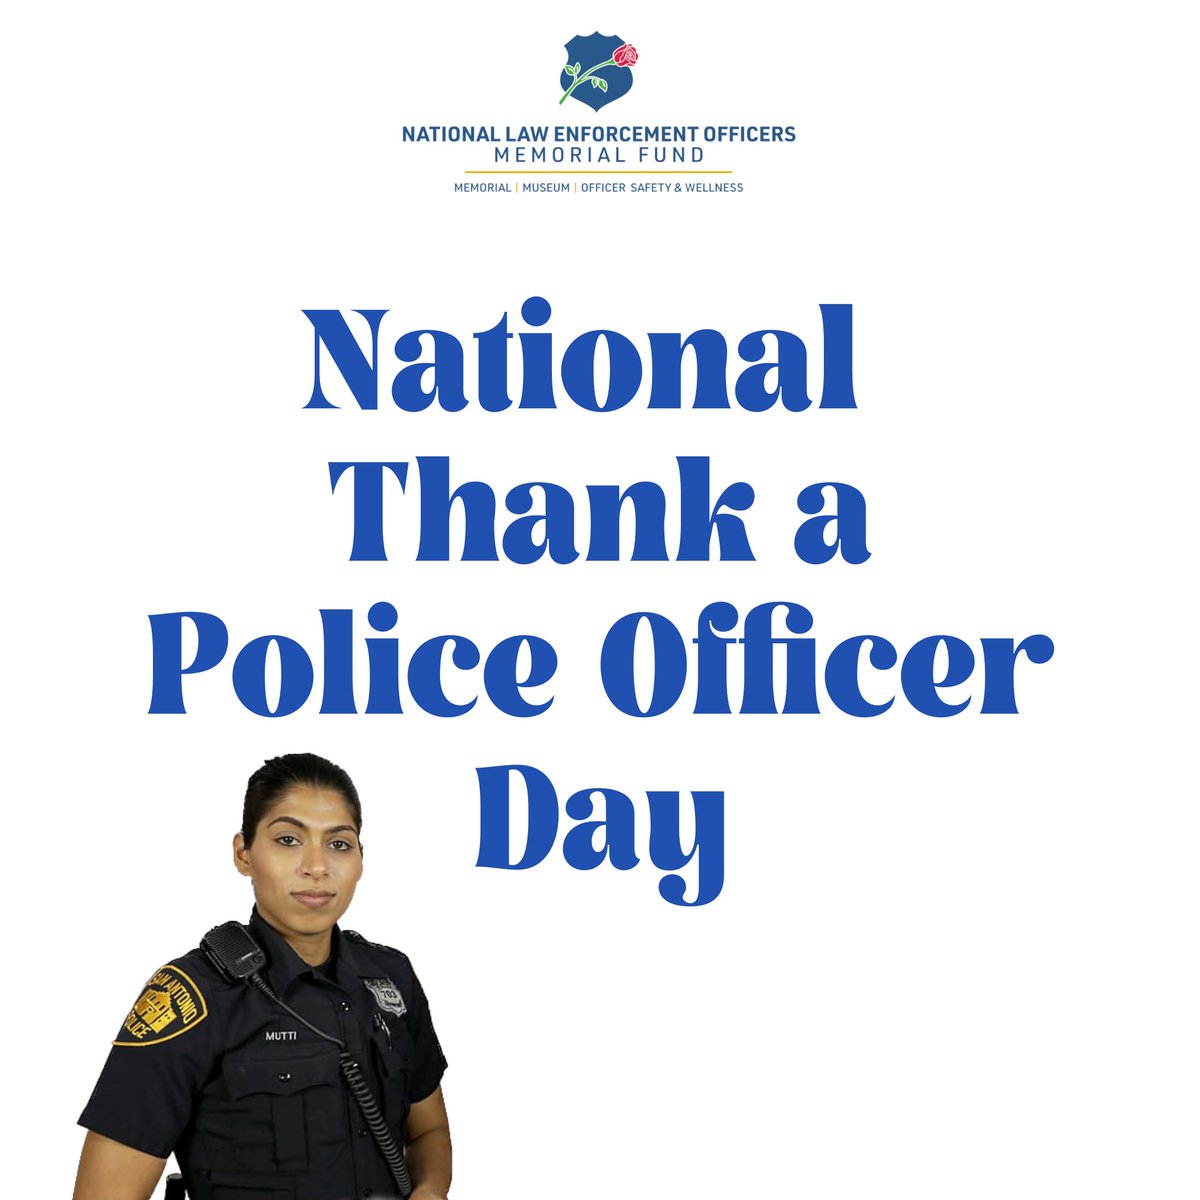 It’s National Thank a Police Officer Day! Please join us in showing the officers you know and the ones you witness protecting your community a small act of gratitude or a simple “thank you.”